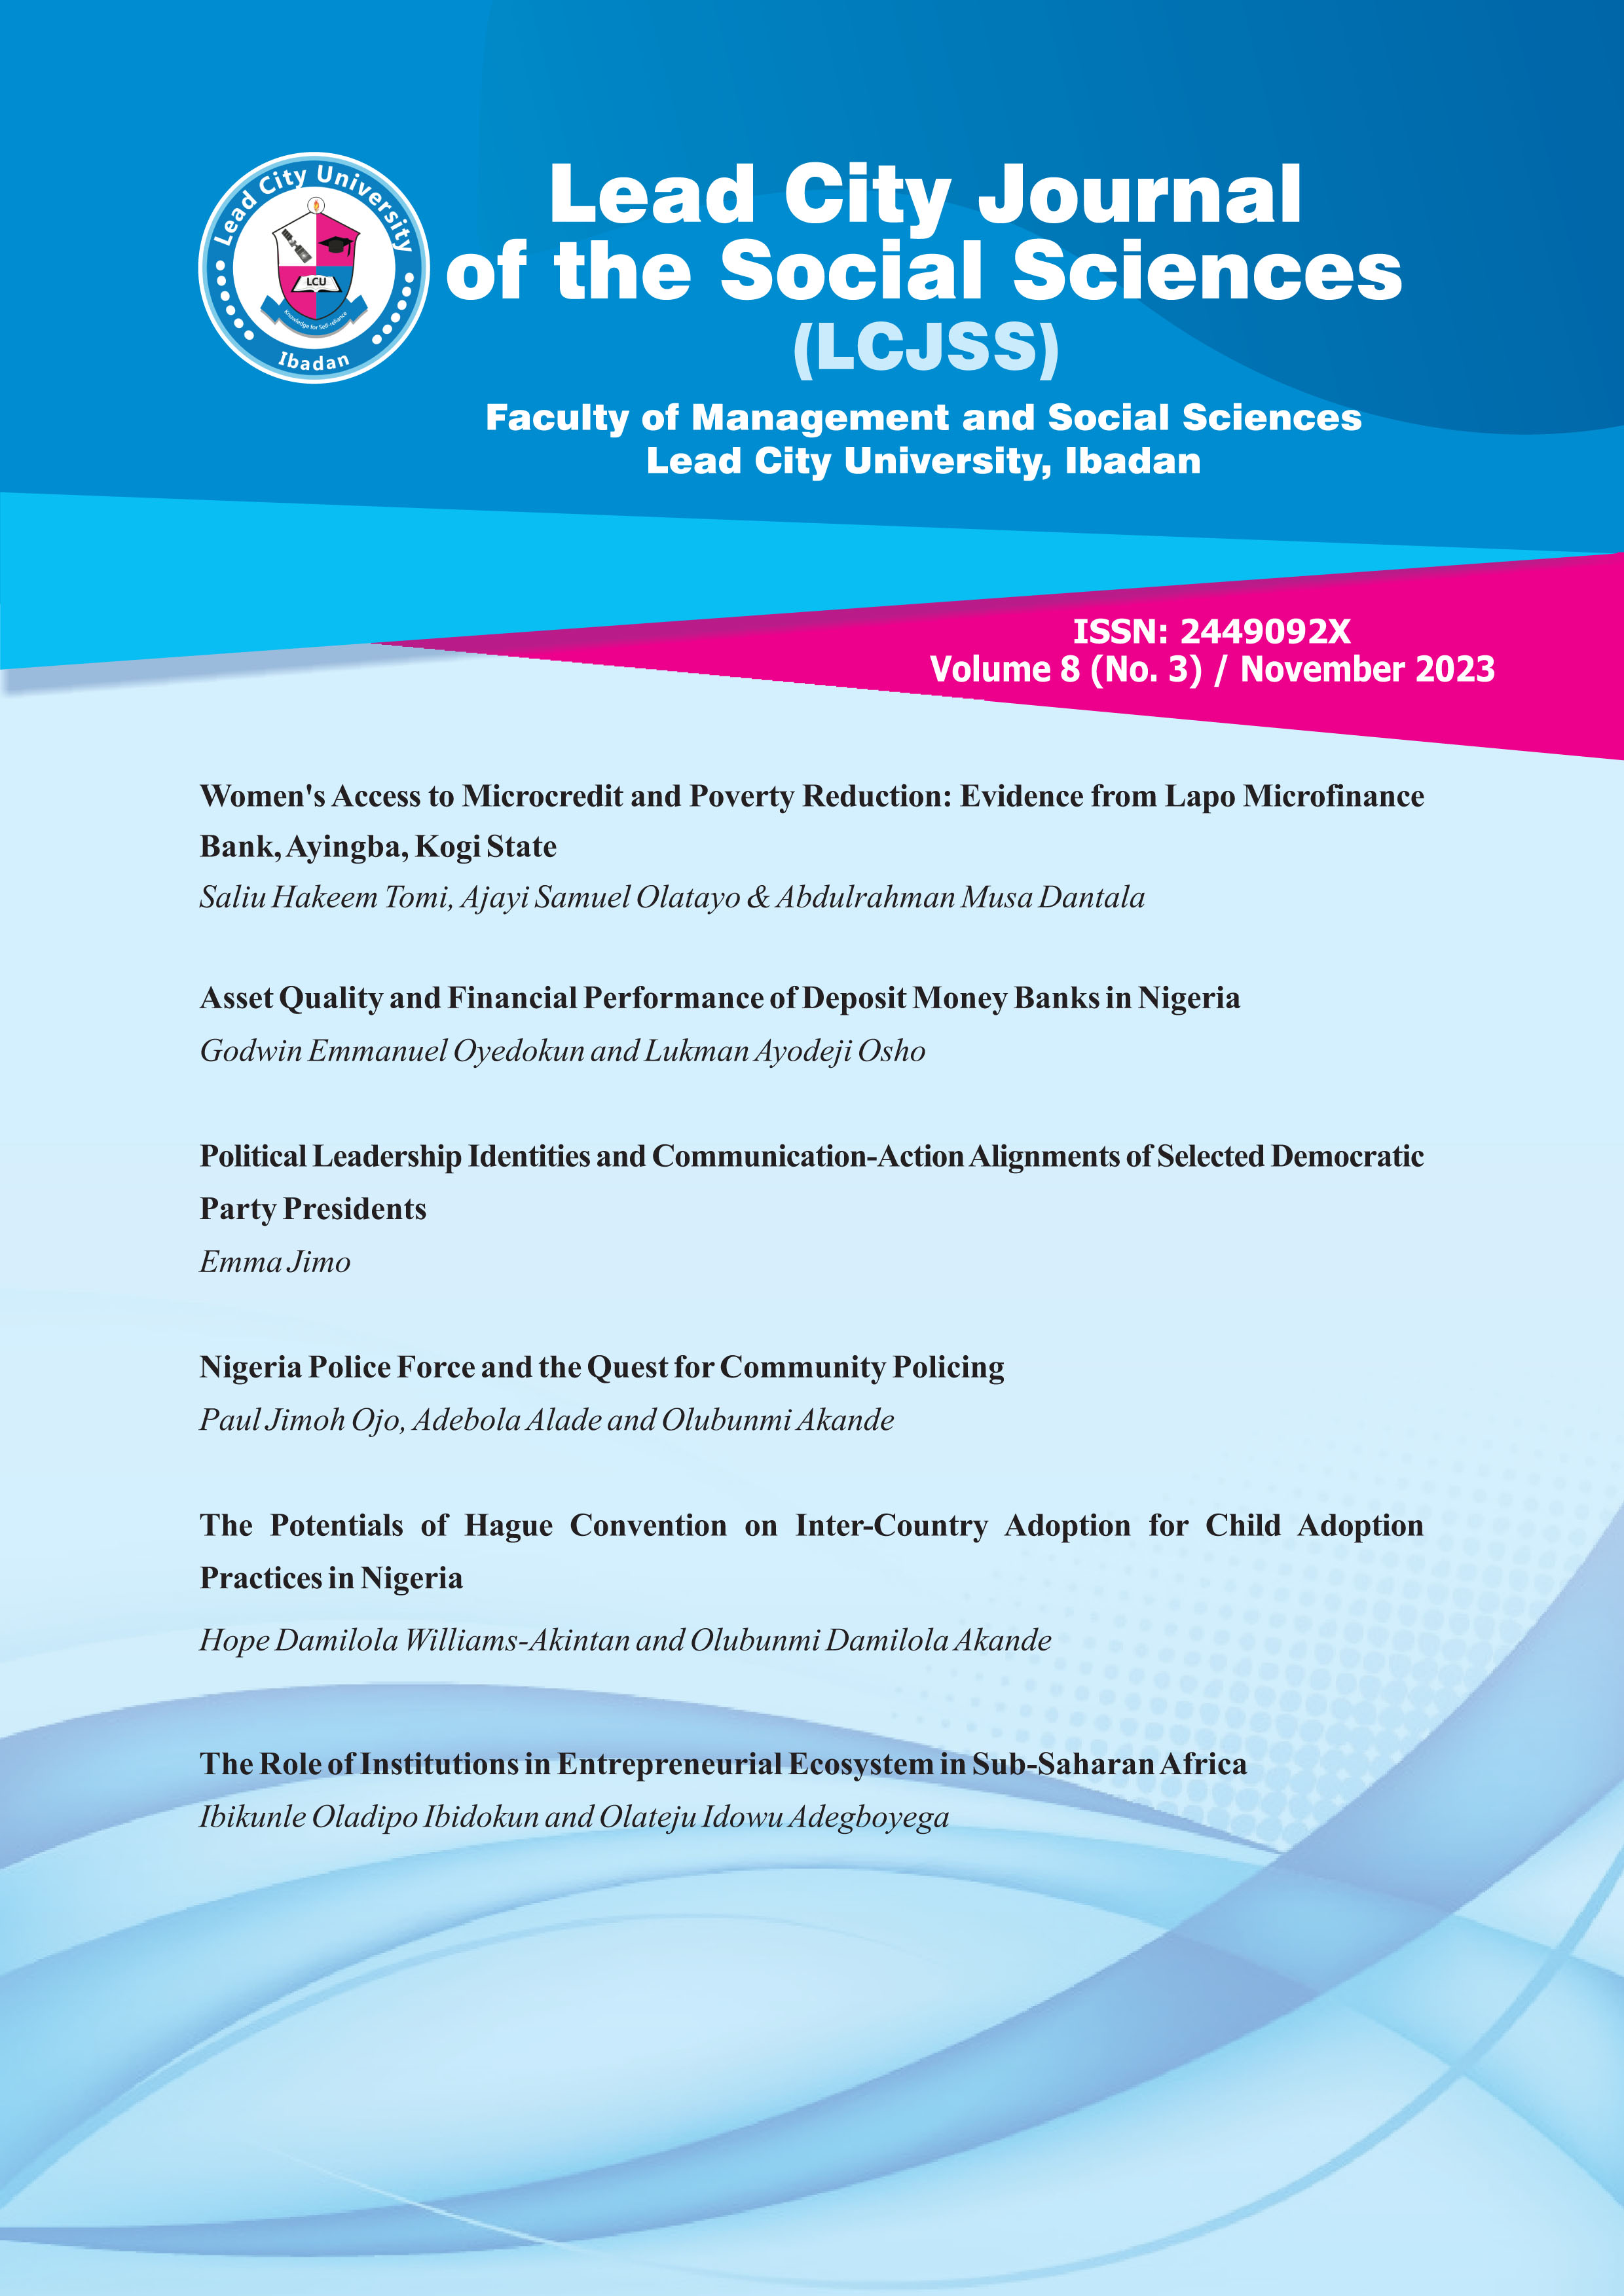 					View Vol. 8 No. 3 (2023): LEAD CITY JOURNAL OF THE SOCIAL SCIENCES
				